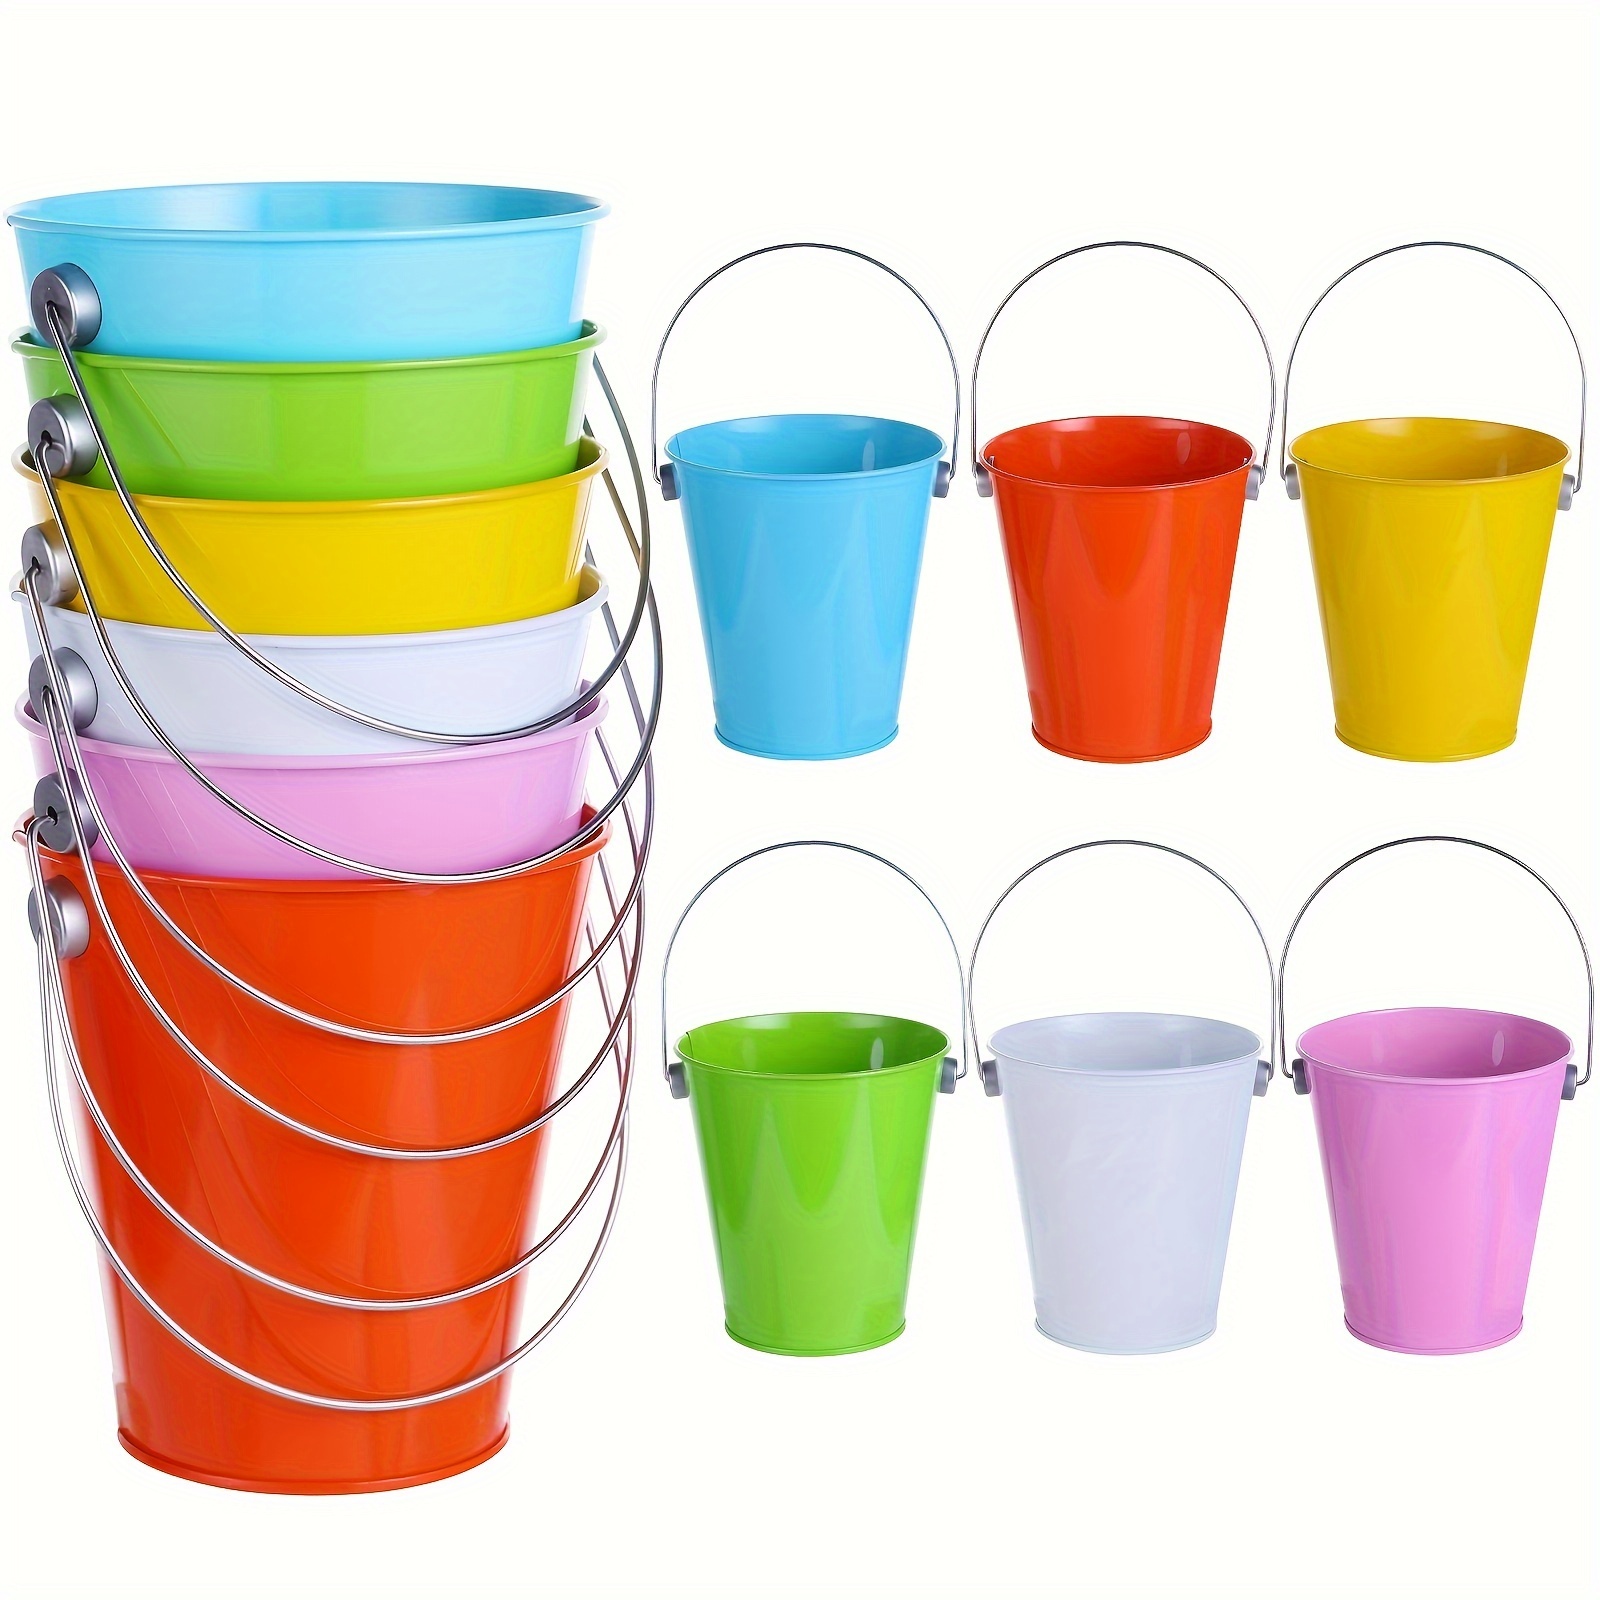 Small Mini Bucket With Handle For Kids Craft Party Customized Candy Flower  Mini Pot Colored Galvanized Buckets Household Supply